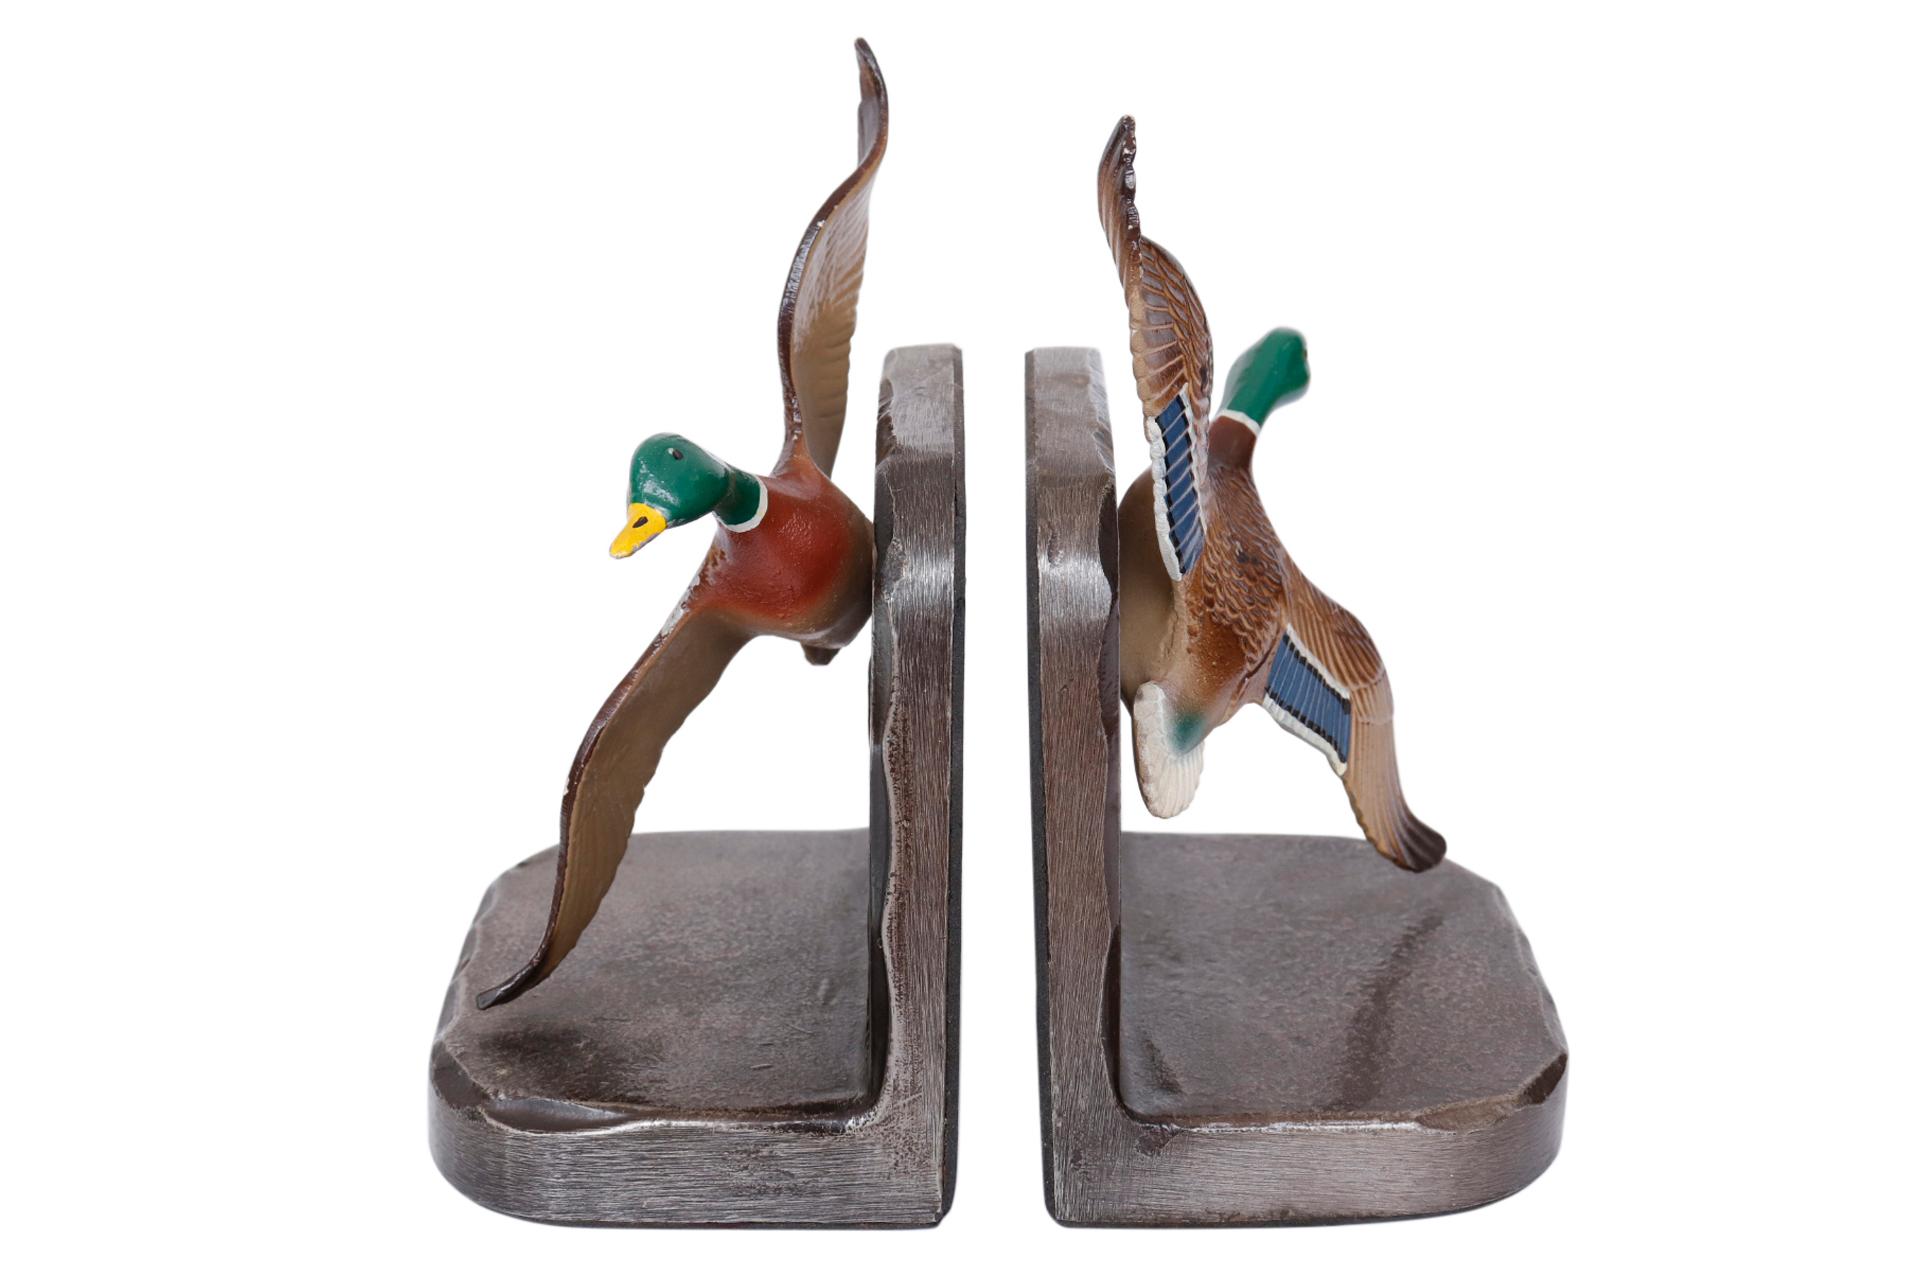 A pair of metal bookends decorated with mallard ducks taking flight. Pressed with feather details and hand painted with the green and blue feathers particular to the mallard duck. Mounted on metal bases etched with a water scene. Dimensions per